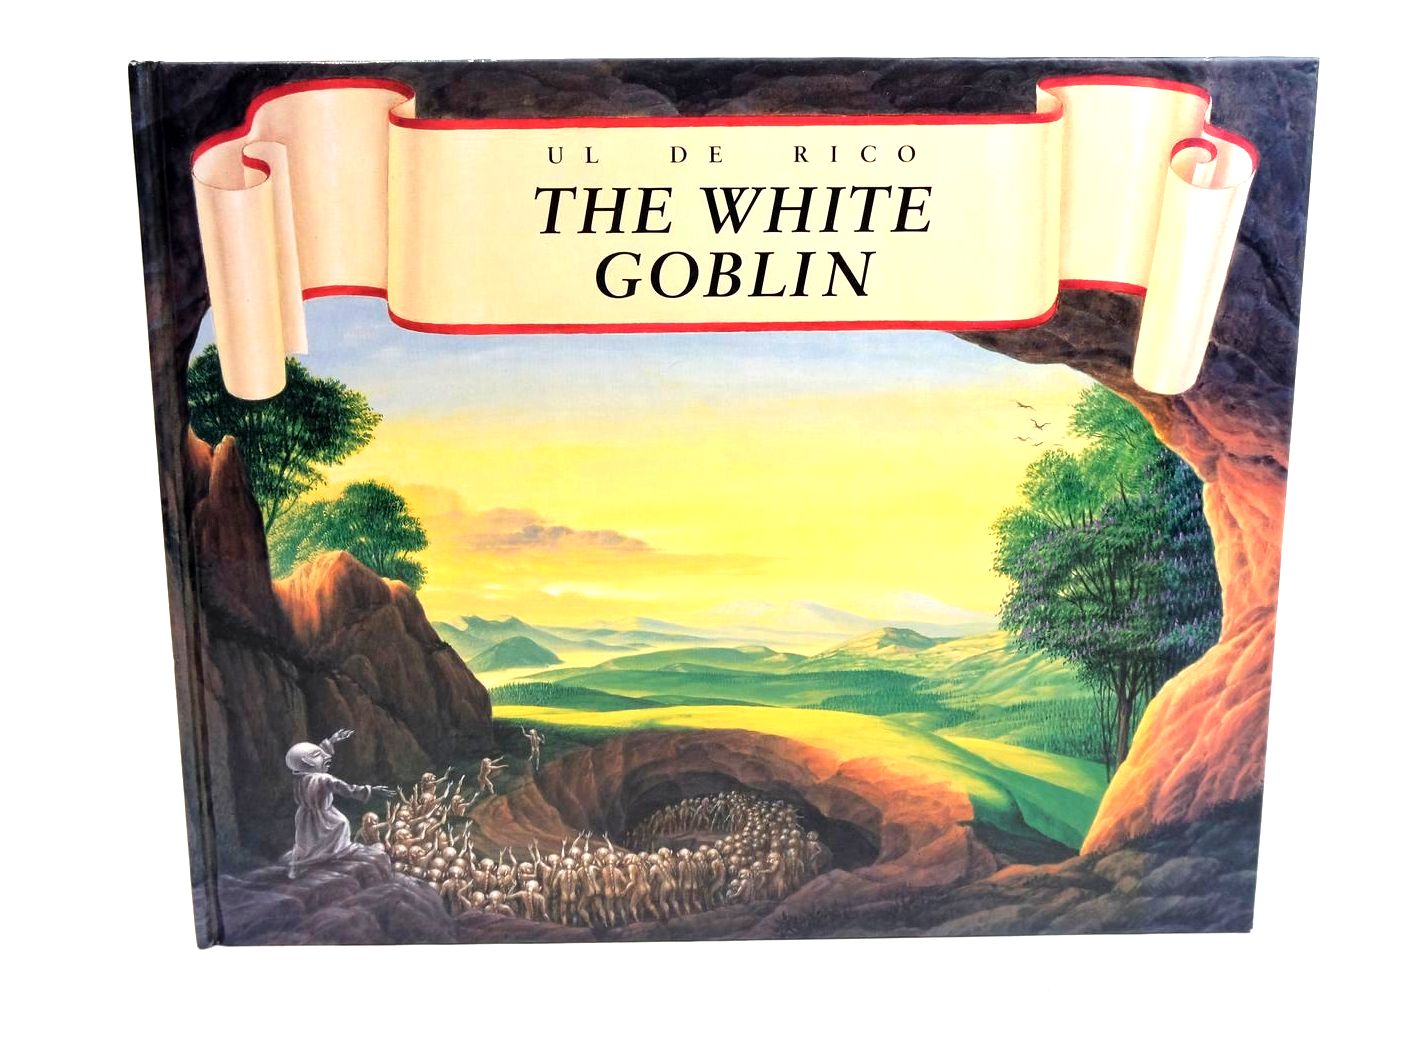 Photo of THE WHITE GOBLIN written by De Rico, Ul illustrated by De Rico, Ul published by Thames and Hudson (STOCK CODE: 1321009)  for sale by Stella & Rose's Books